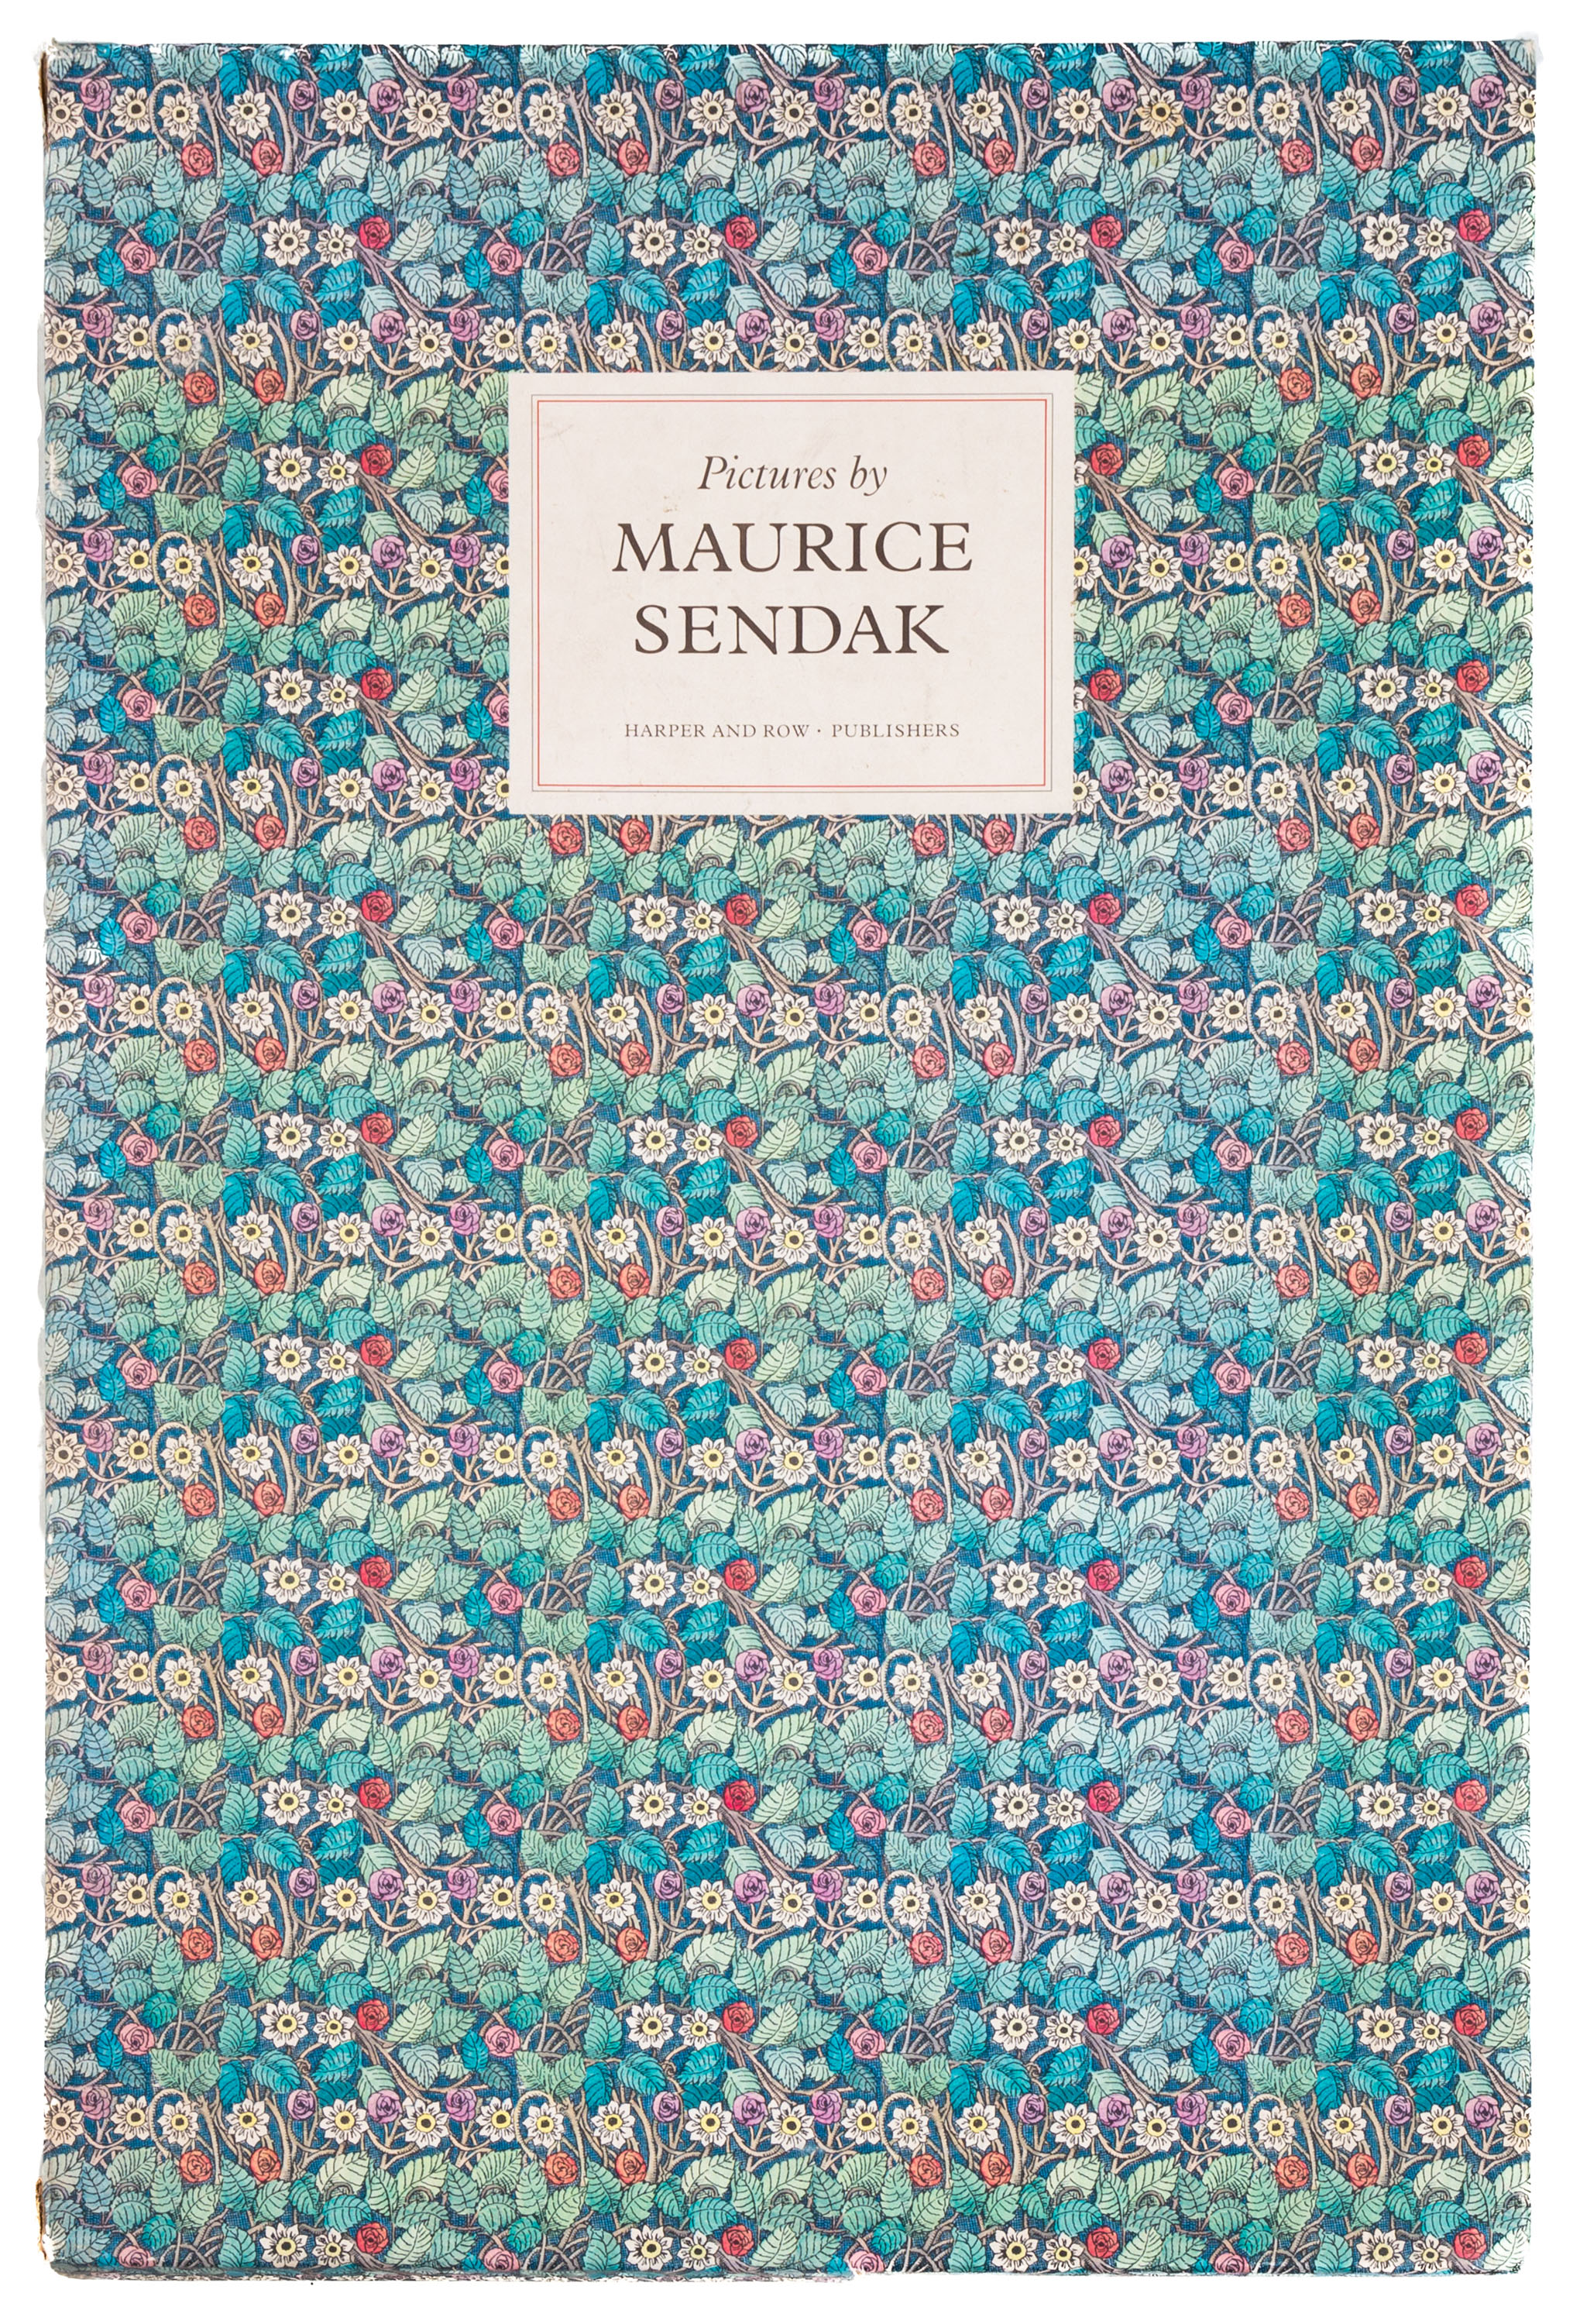 "PICTURES BY MAURICE SENDAK" BY